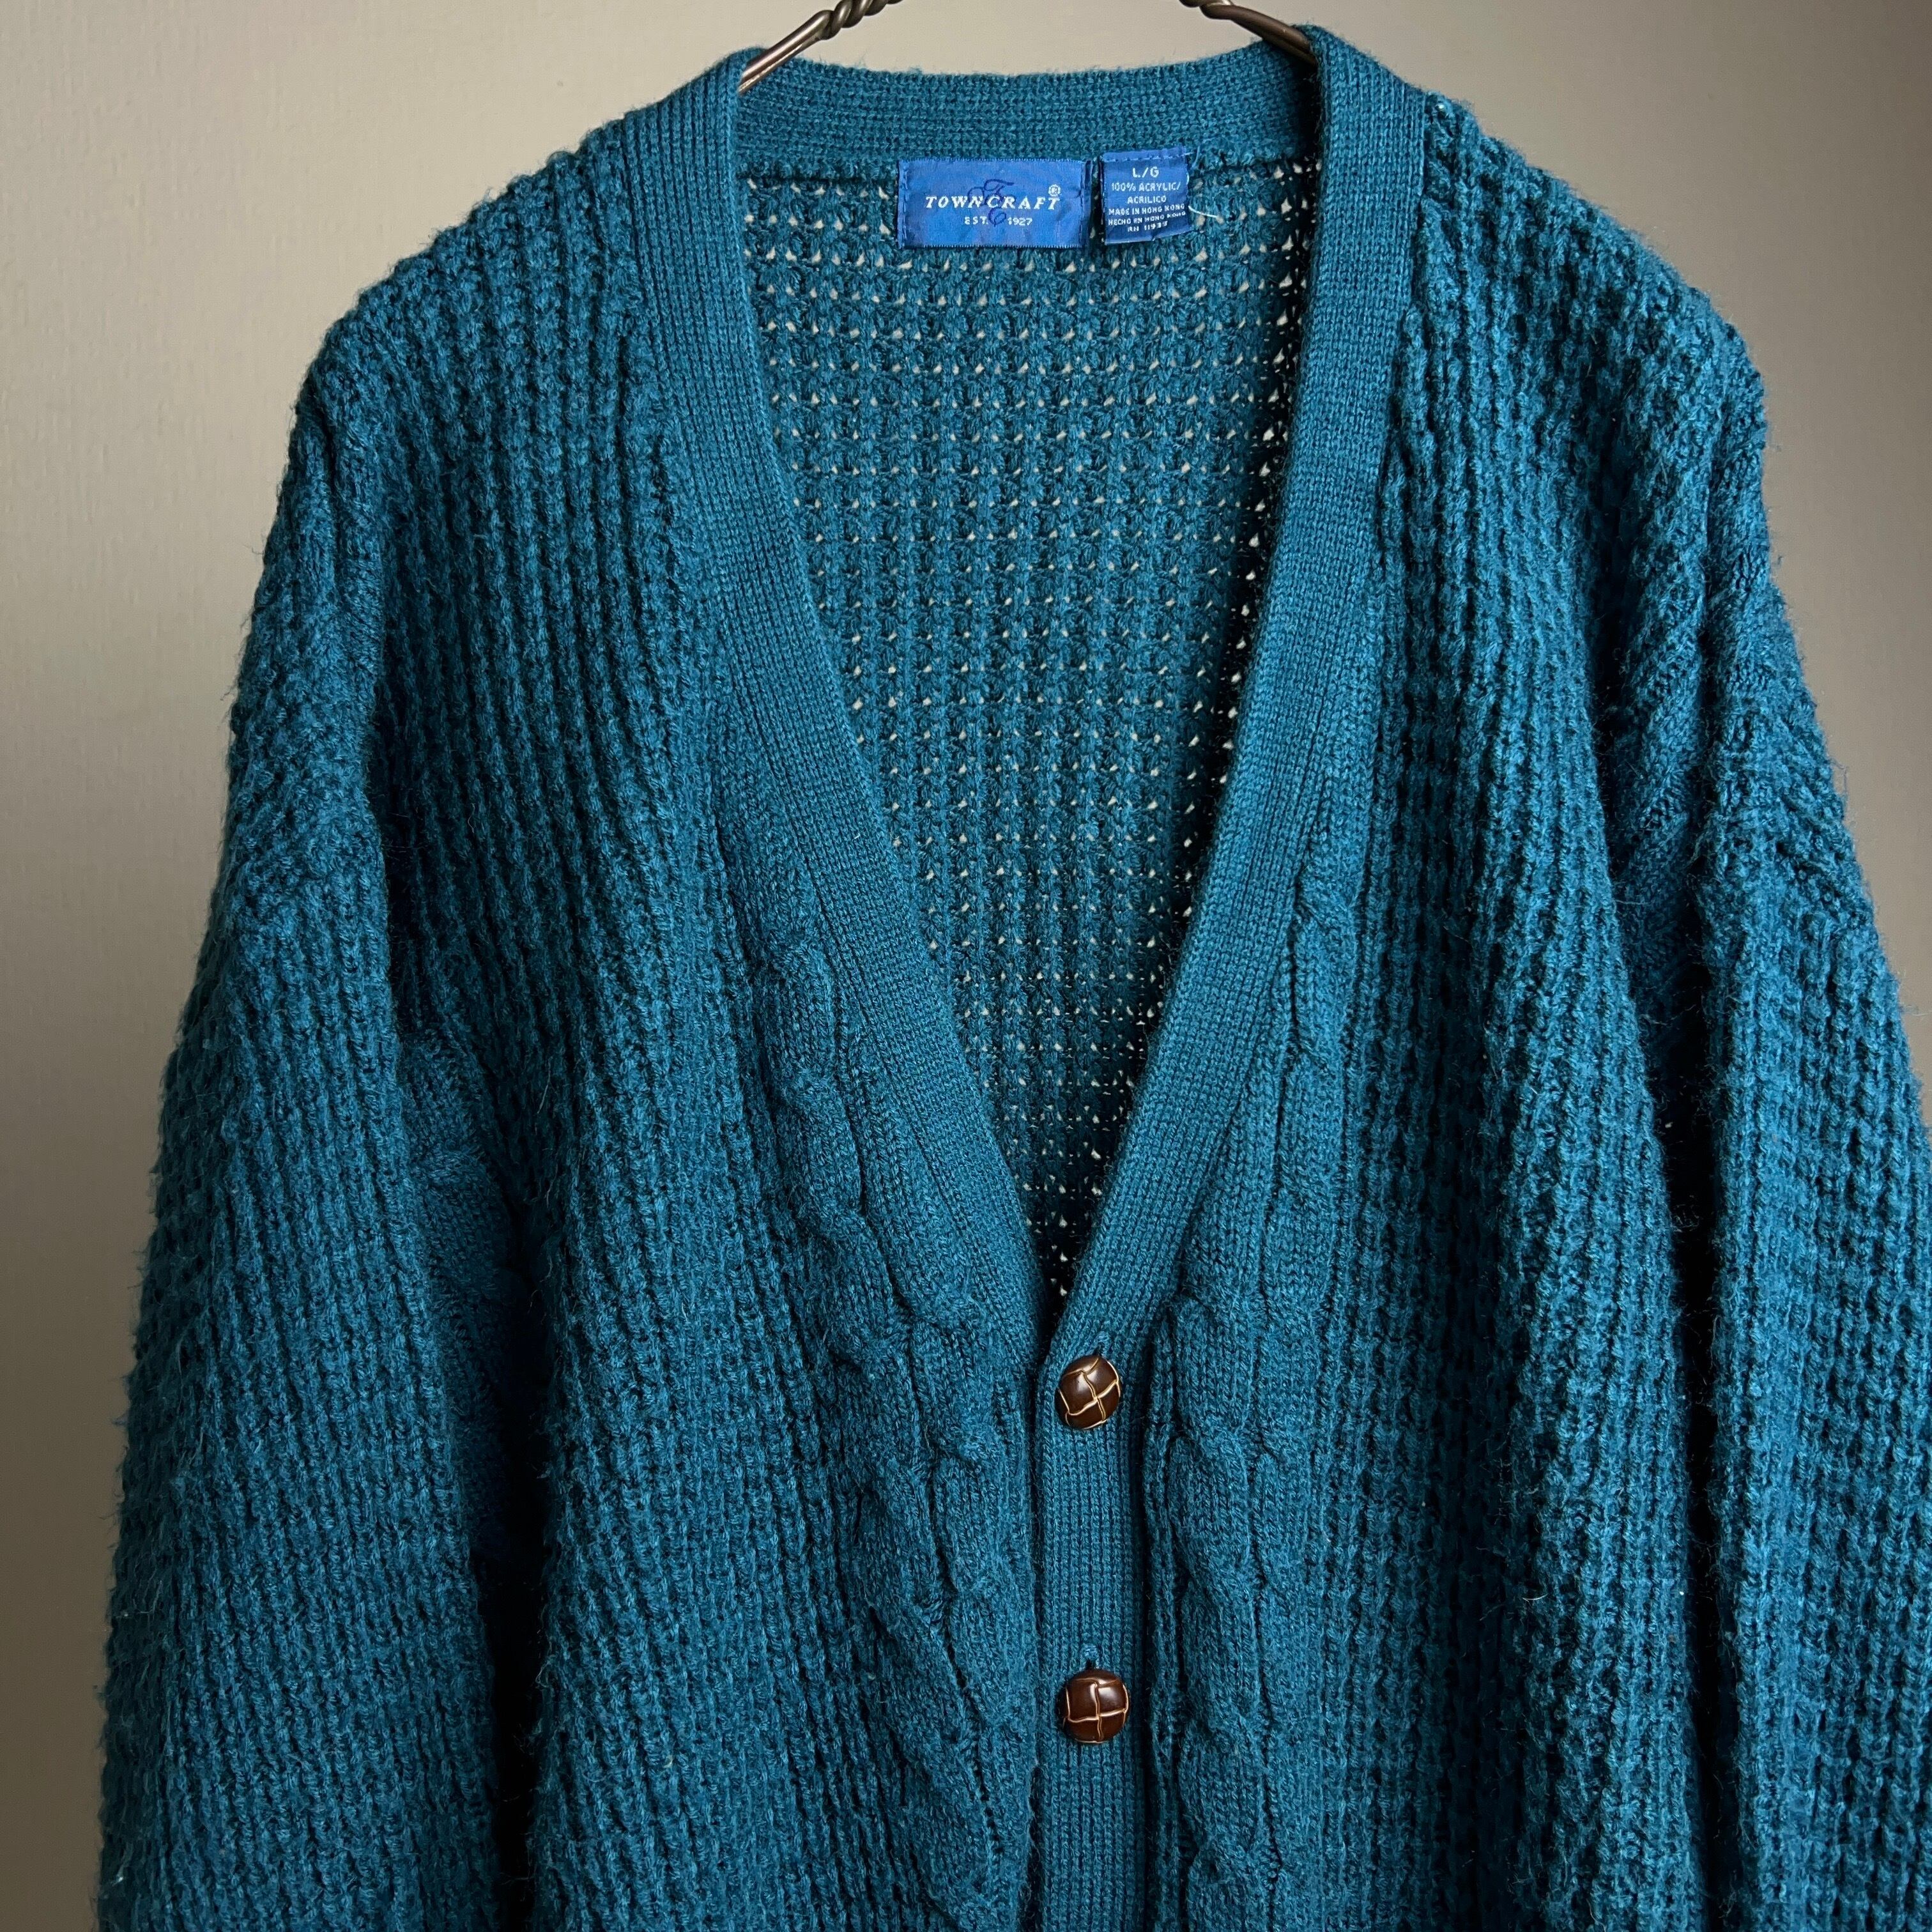 old TOWNCRAFT Knit Cardigan Blue SIZE L 90年代 タウンクラフト 